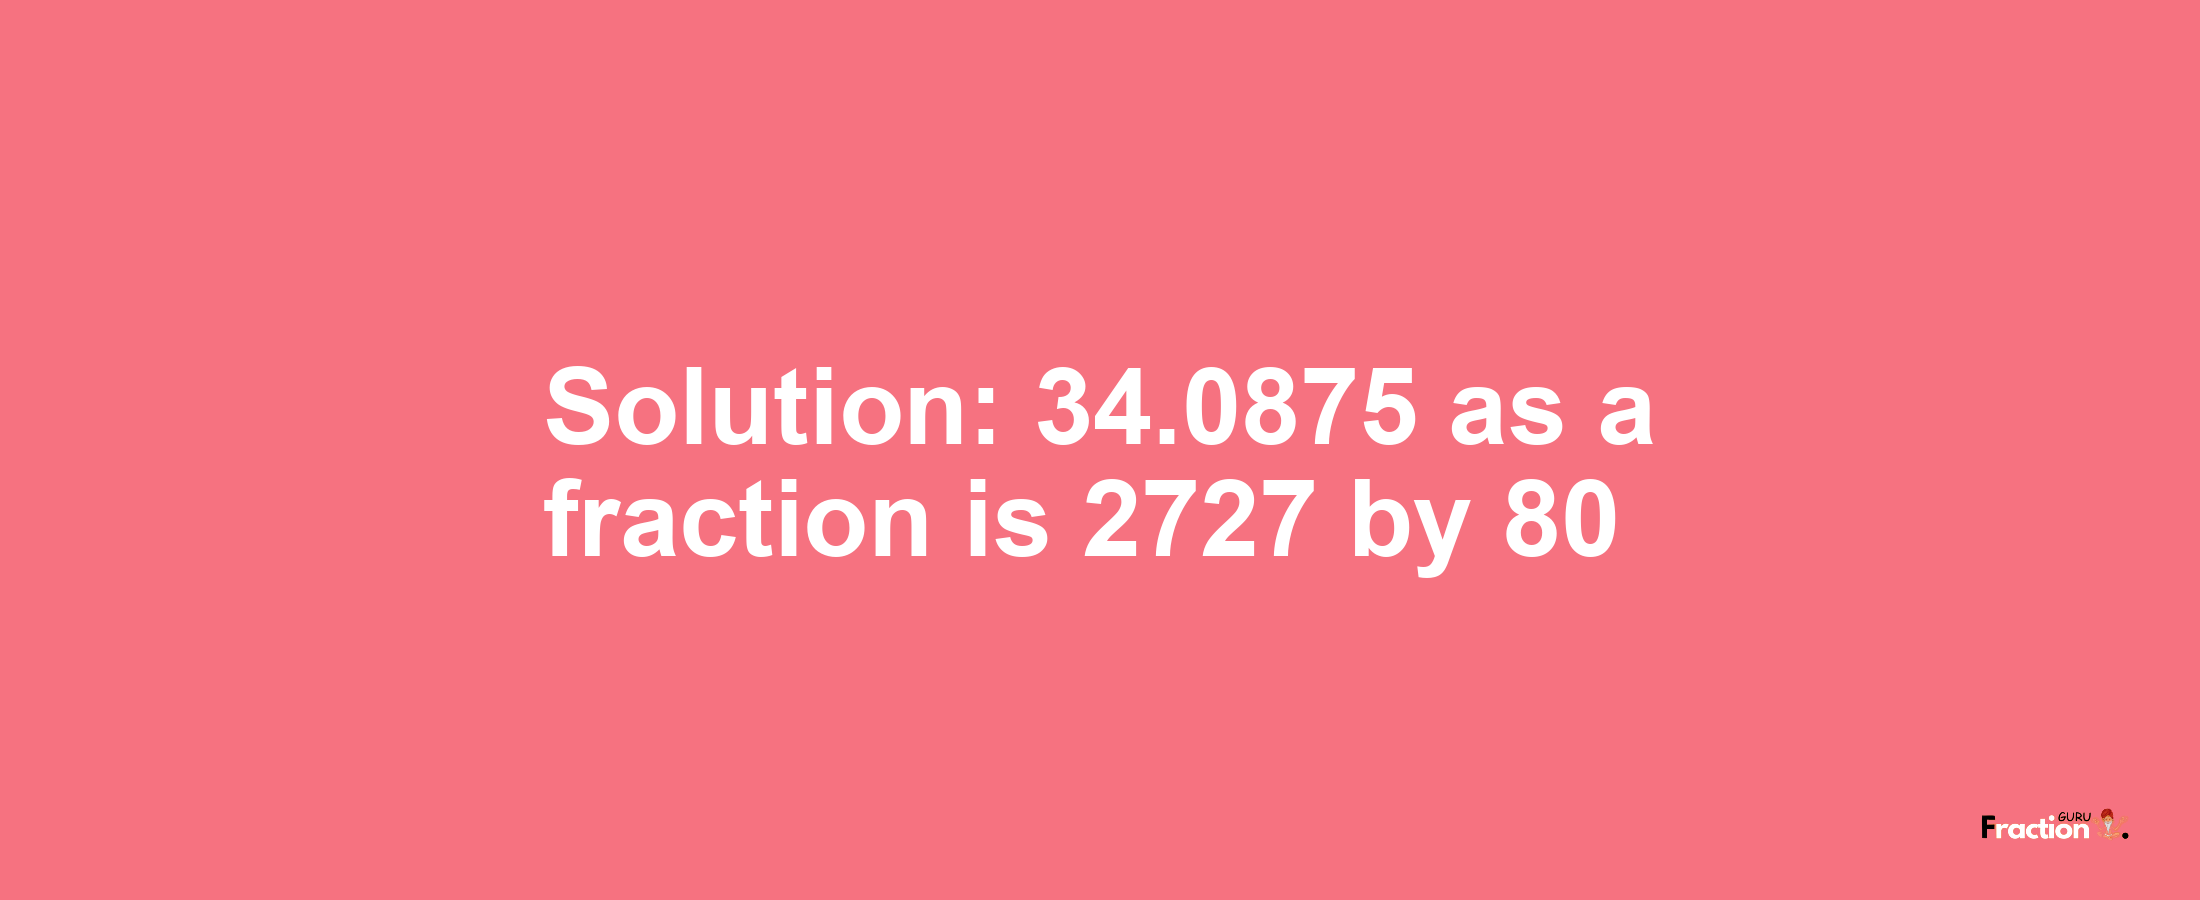 Solution:34.0875 as a fraction is 2727/80